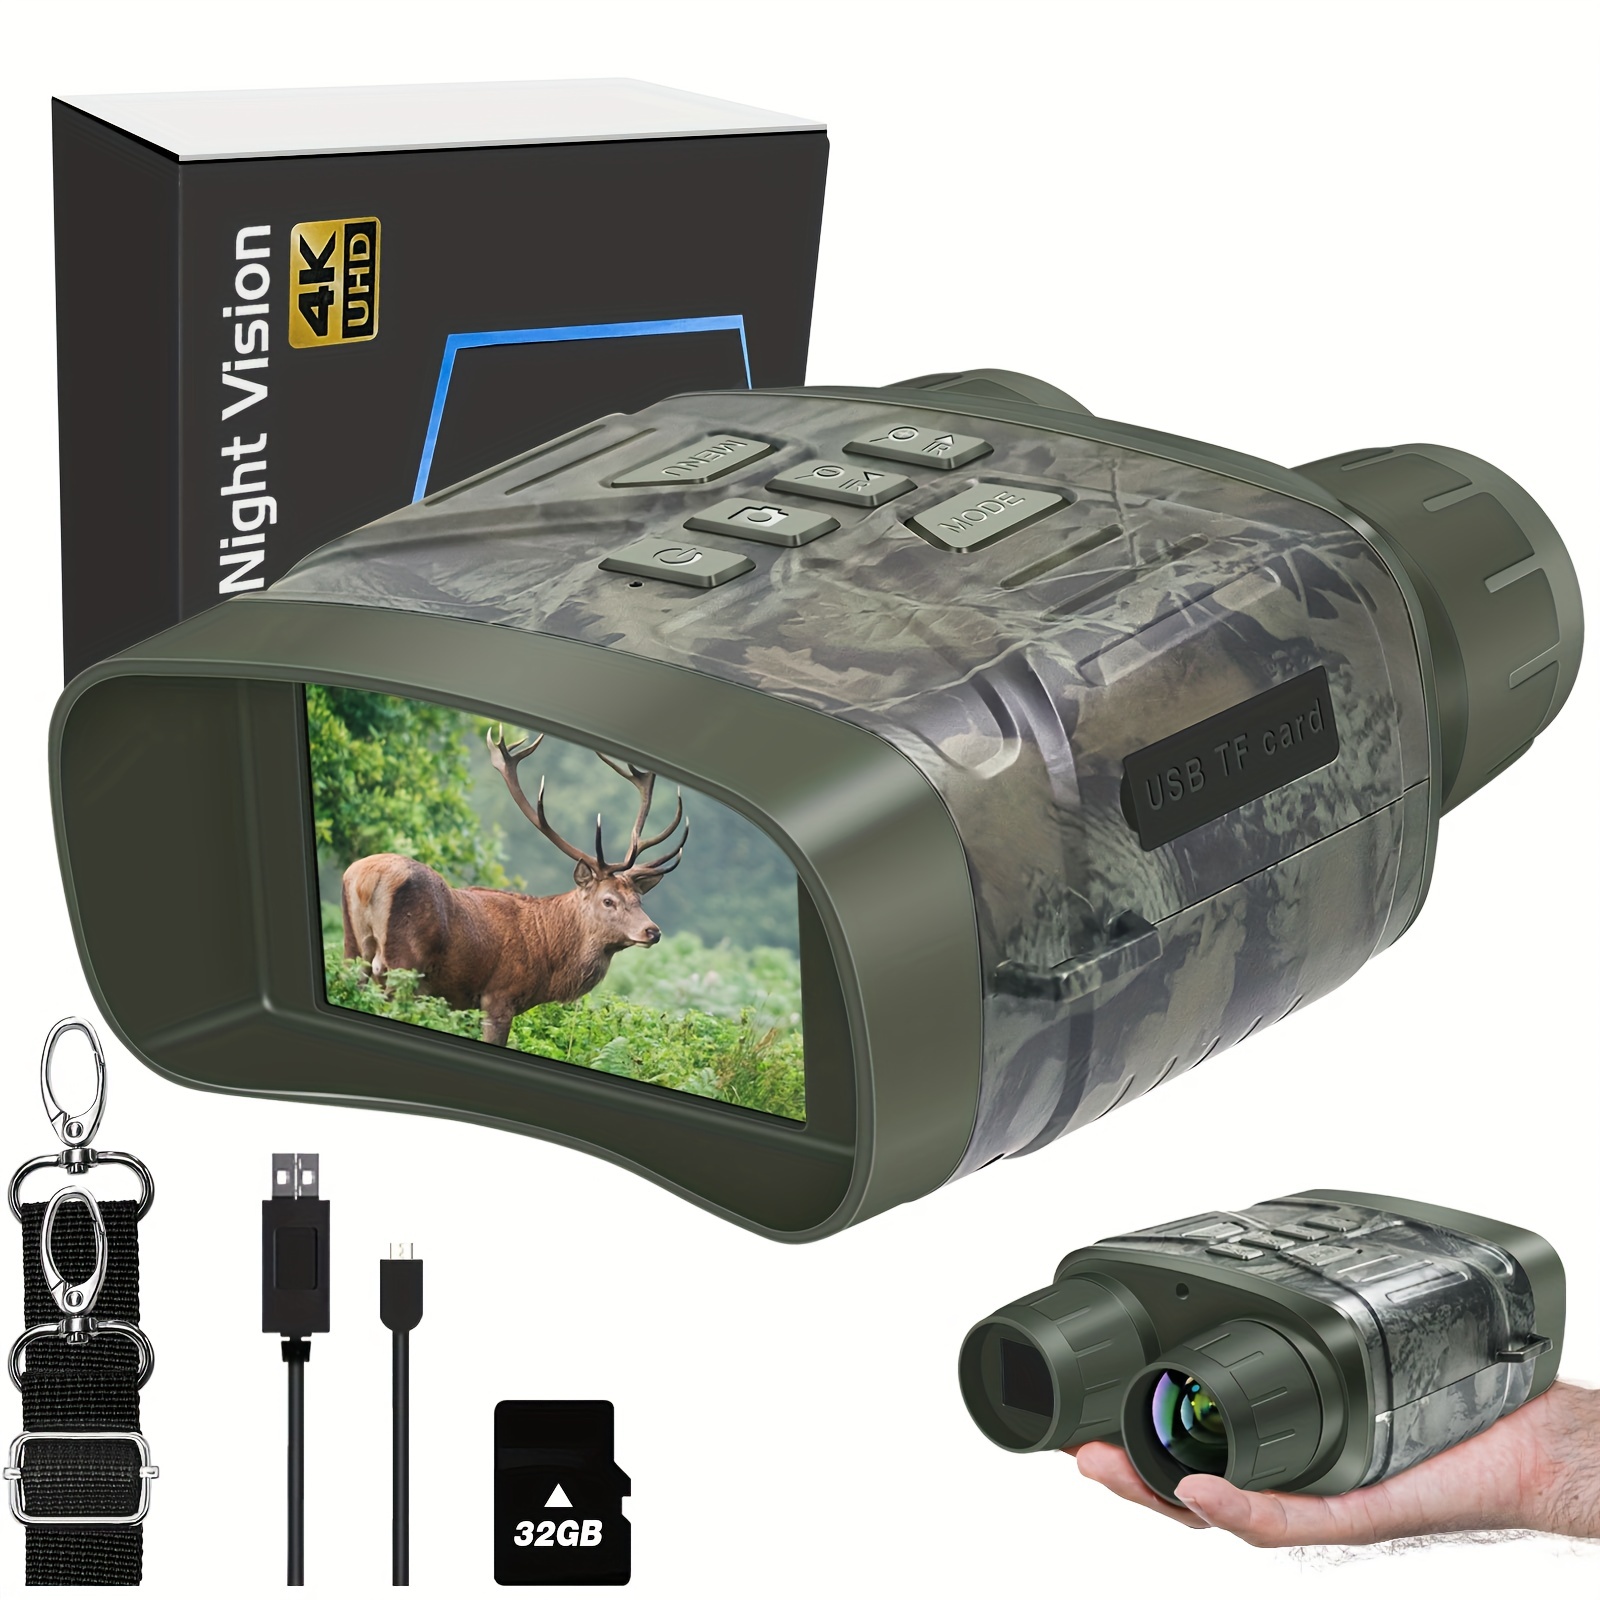 NVG10 Night Vision WiFi 1080P Monocular Goggles Hunting Observation  Instrument